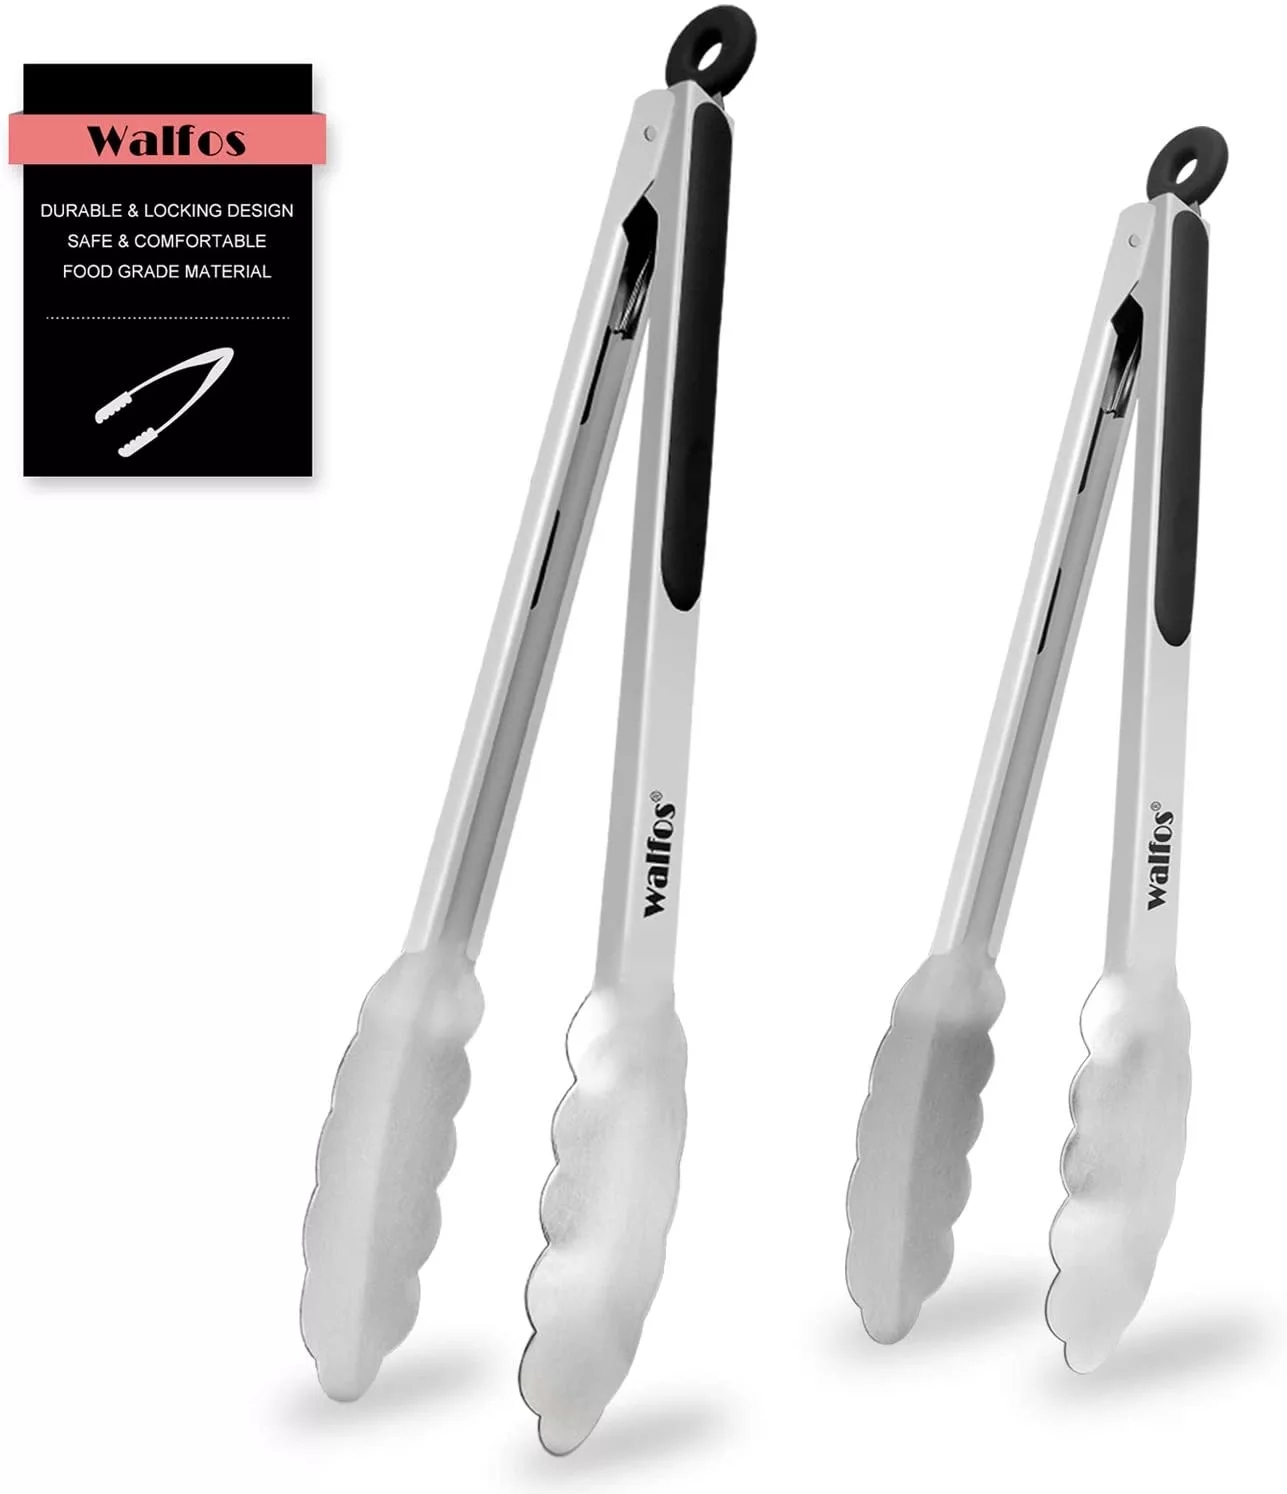 Black Salad,Steak,Set of 2 9 & 12 Inch Silicone Kitchen Tongs,Heavy Duty Non-Stick Stainless Steel Tongs Set with Locking O-Ring Head and Silicone Tips Serving For Cooking,BBQ,Barbecue 